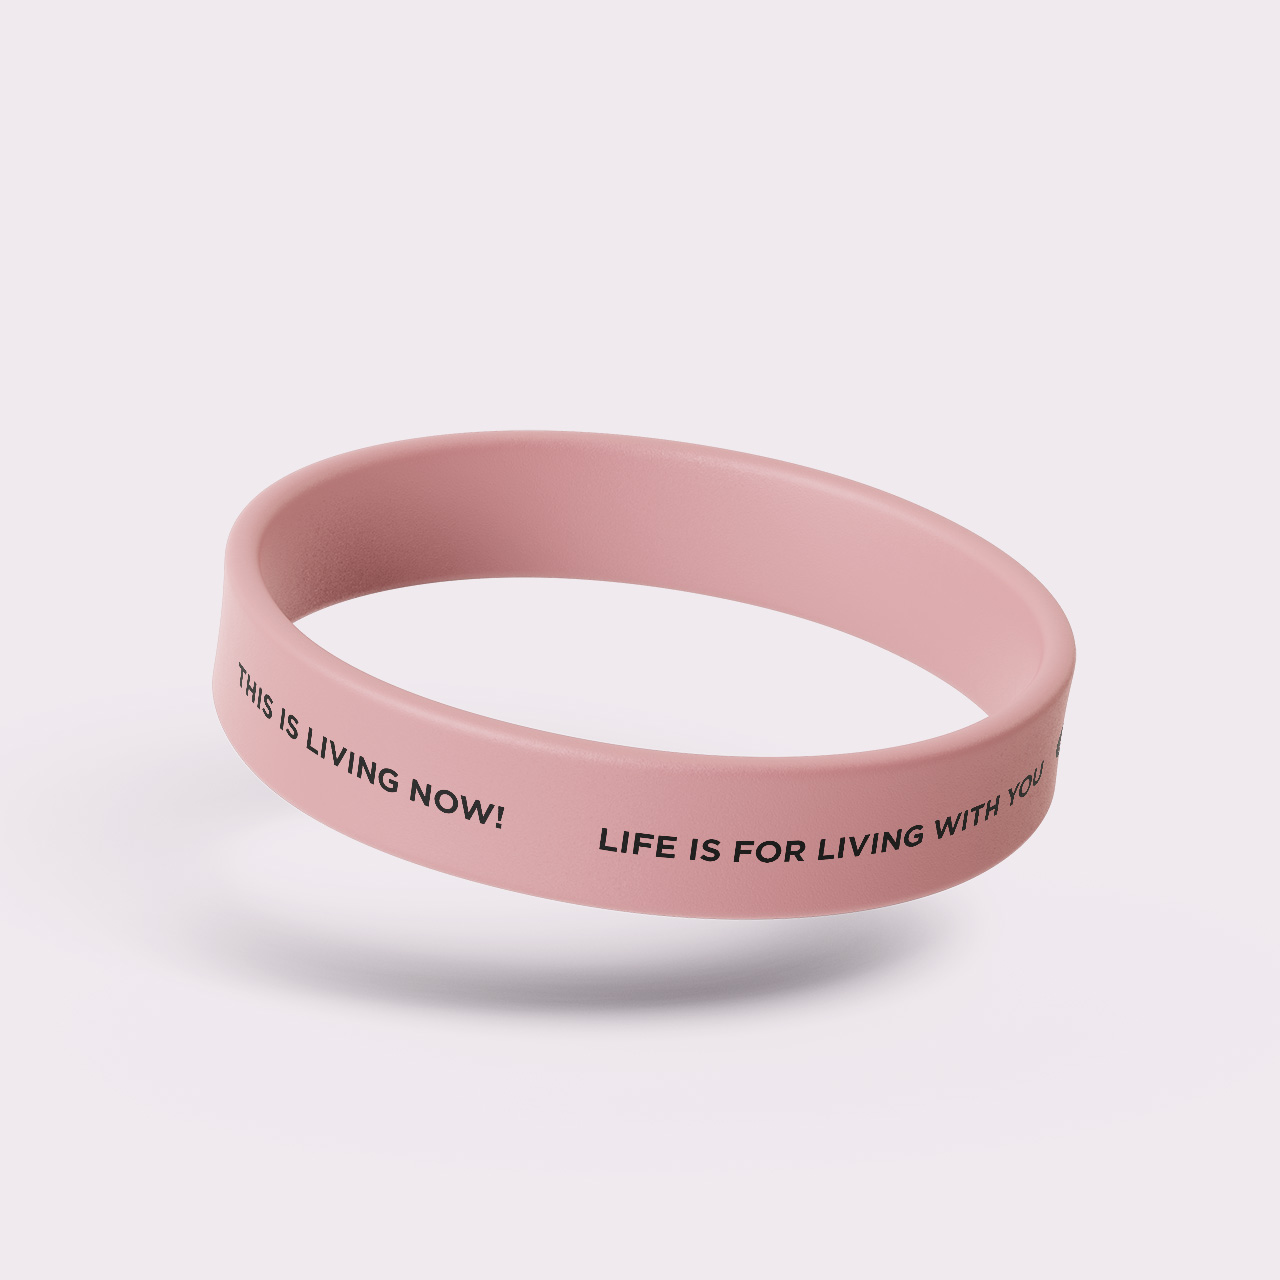 OW41004 - Siliconen armband - This is living now! Life is for living with you